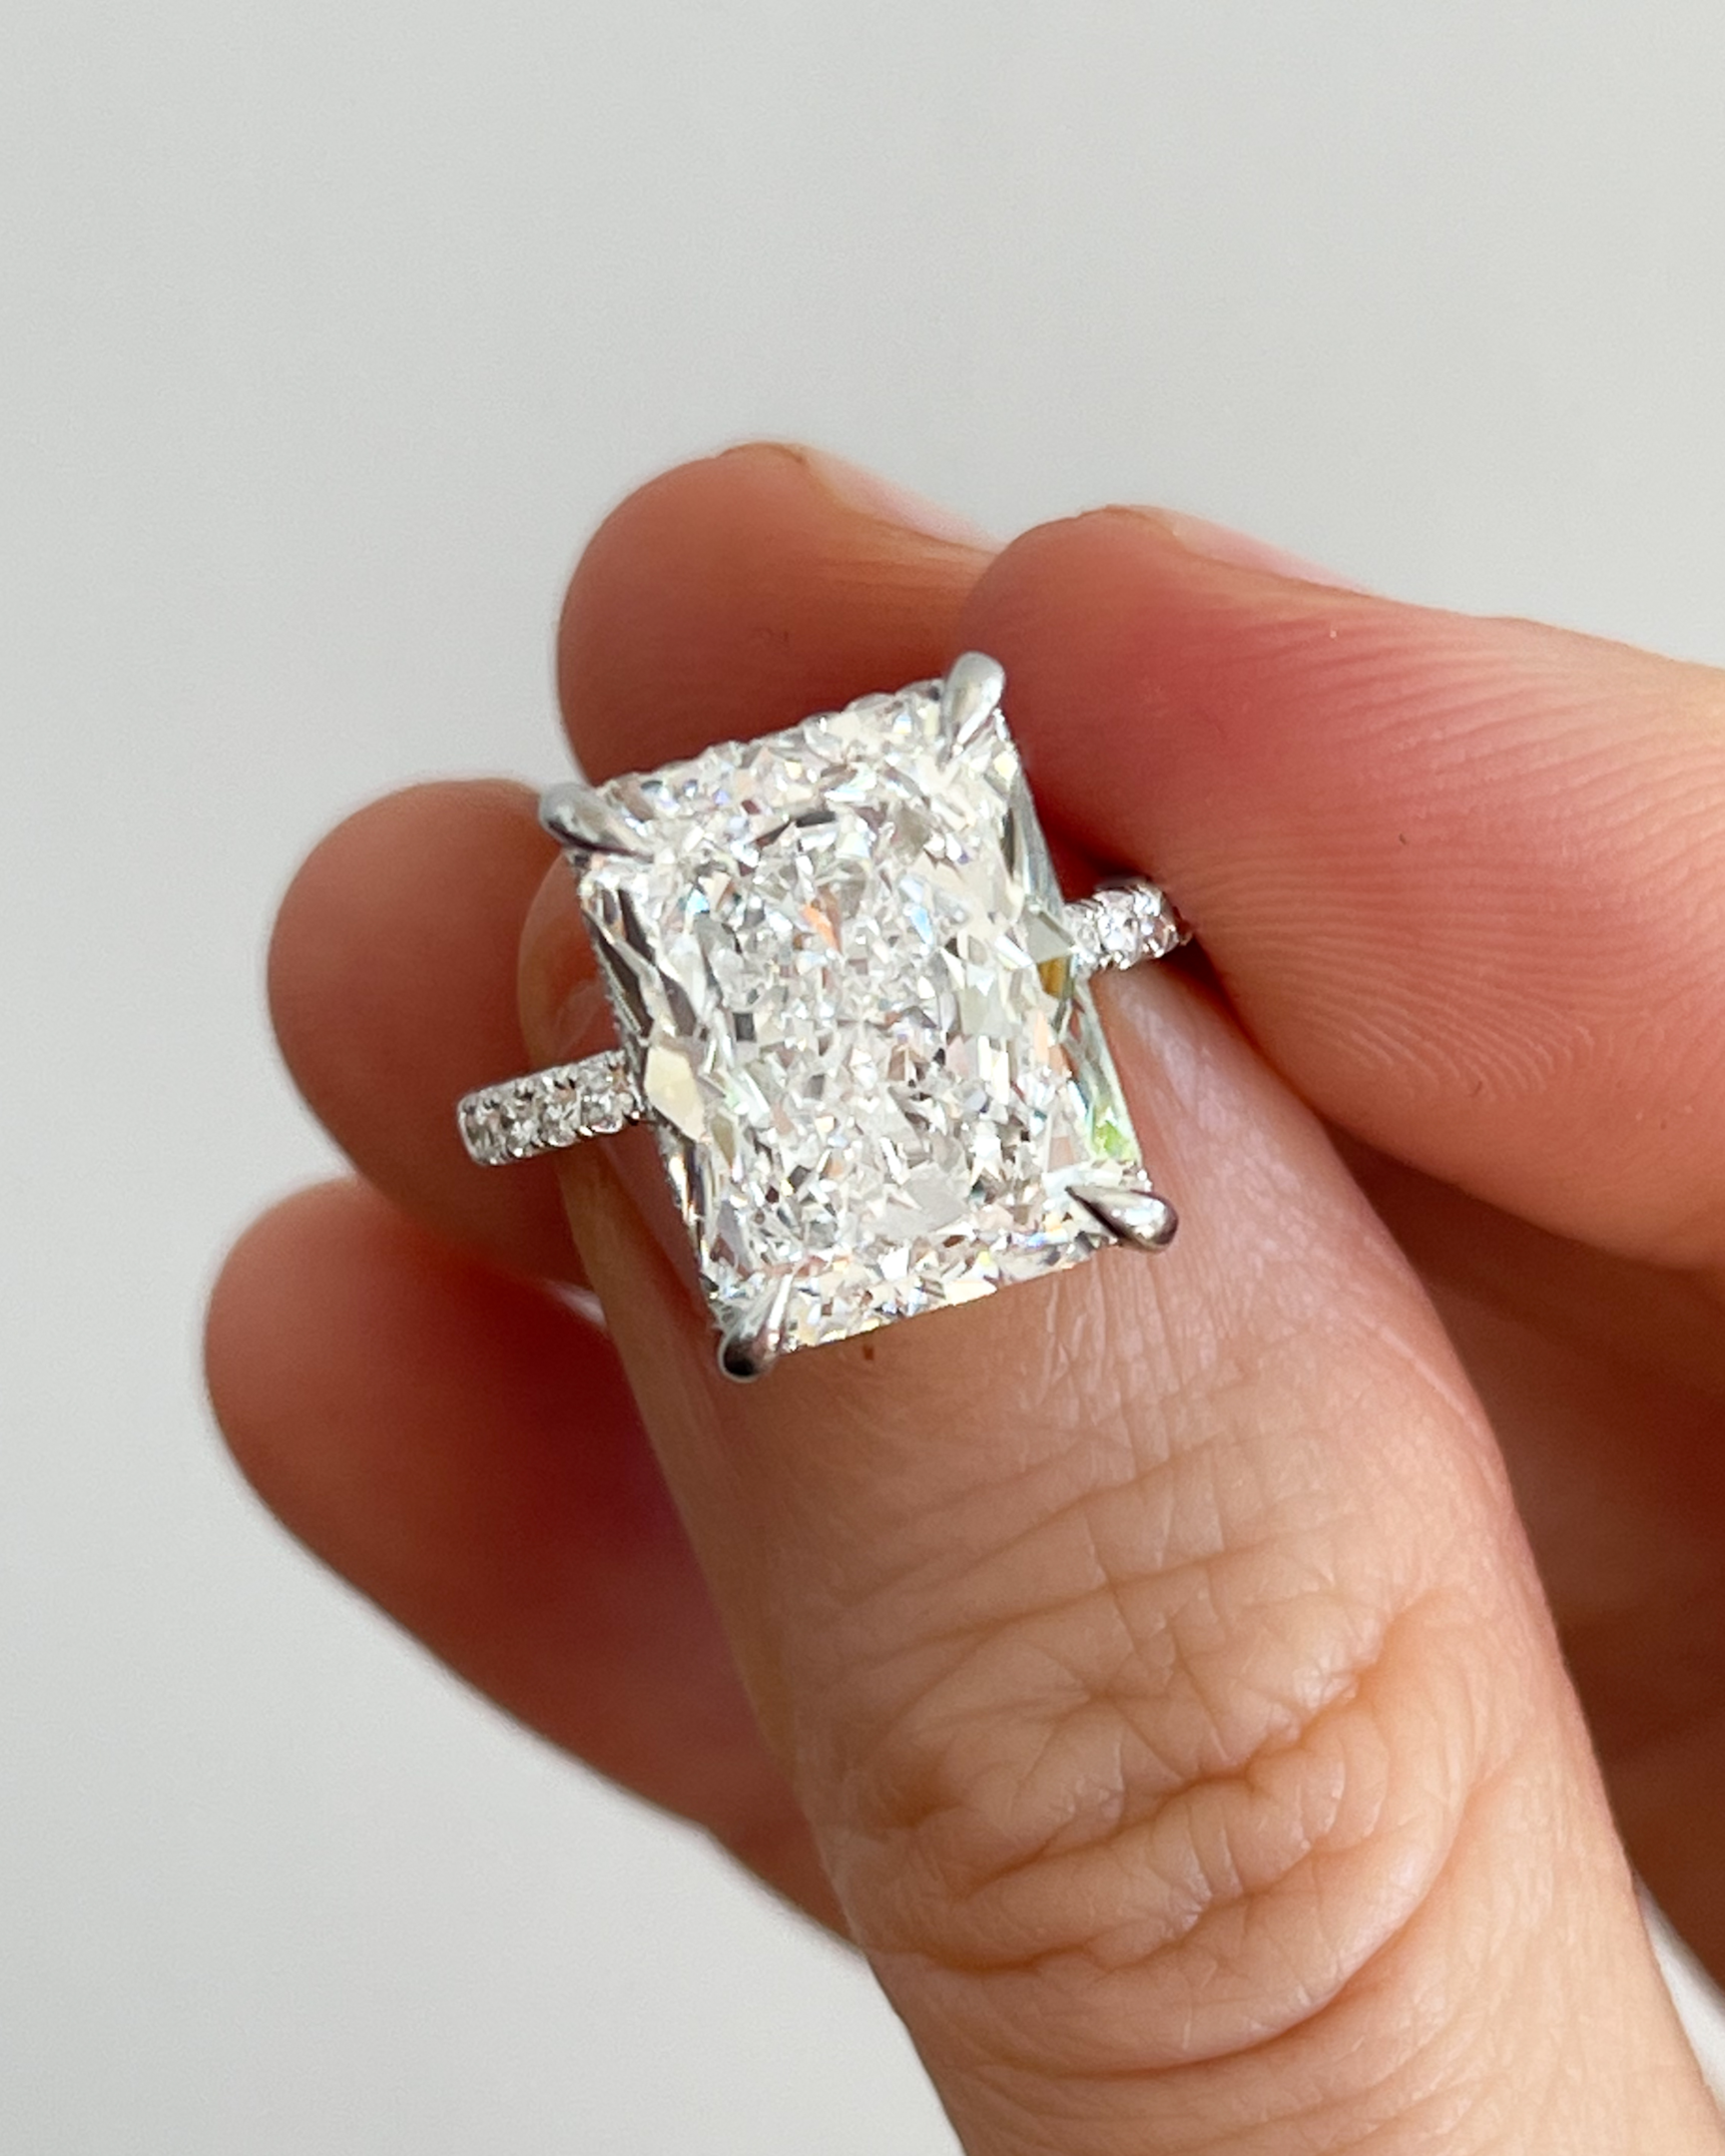 A 7 carat Radiant Cut diamond in our Signature Pavé engagement ring